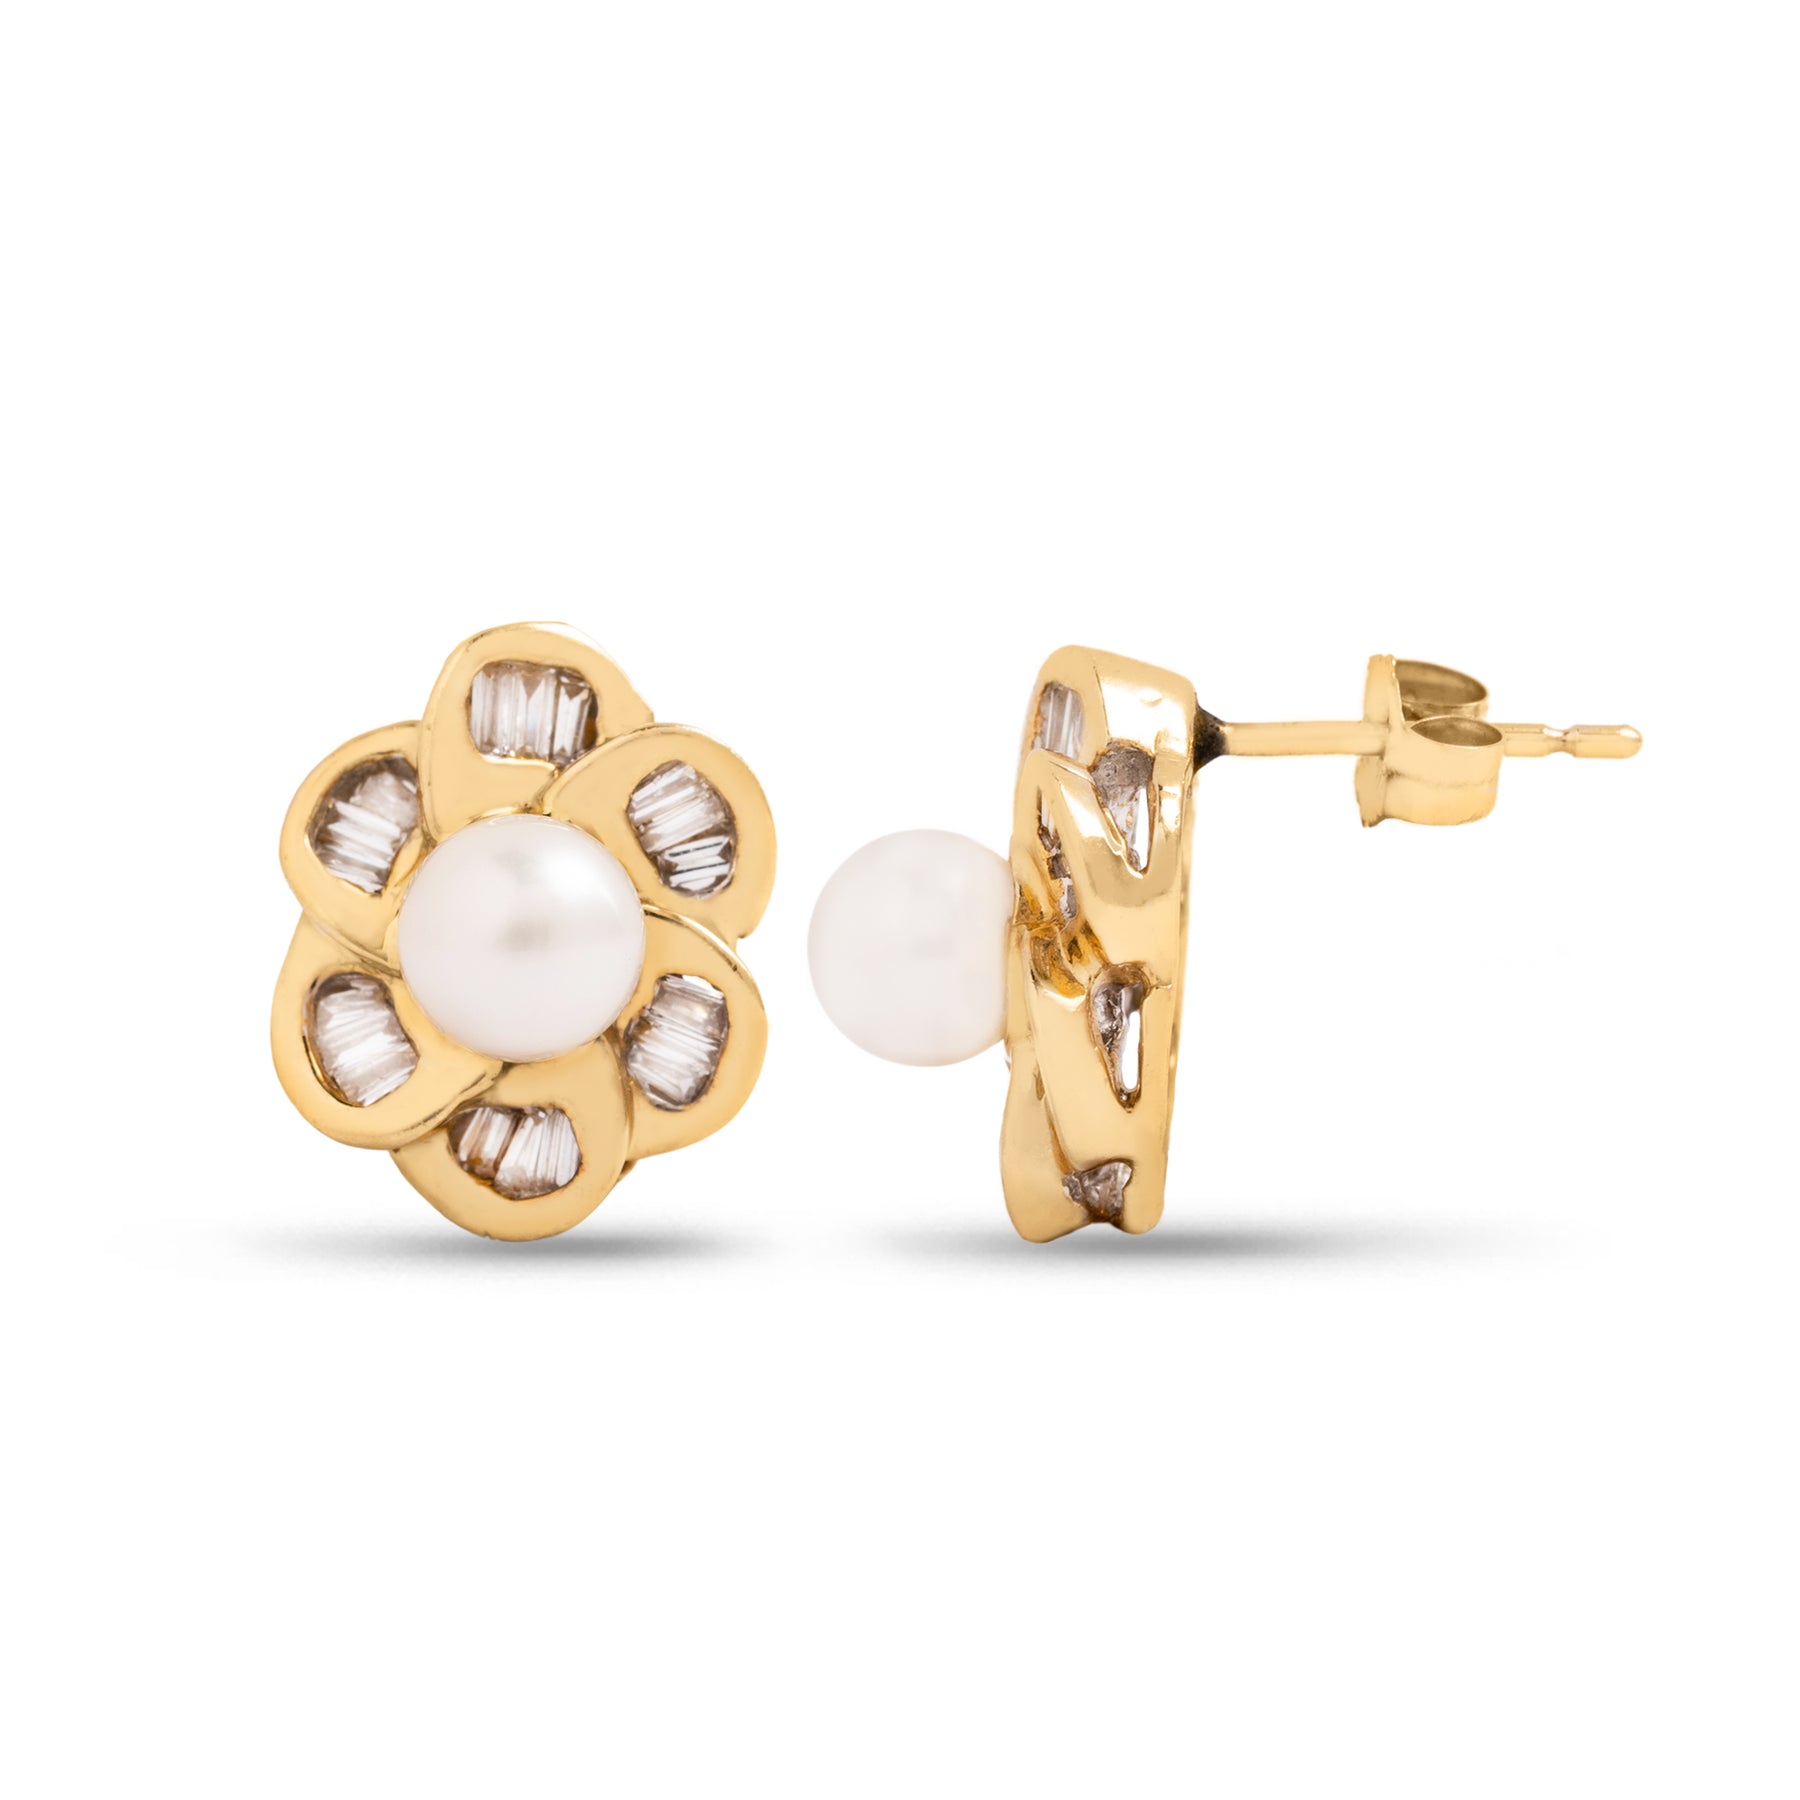 14k yellow gold floral diamond and pearl stud estate earrings